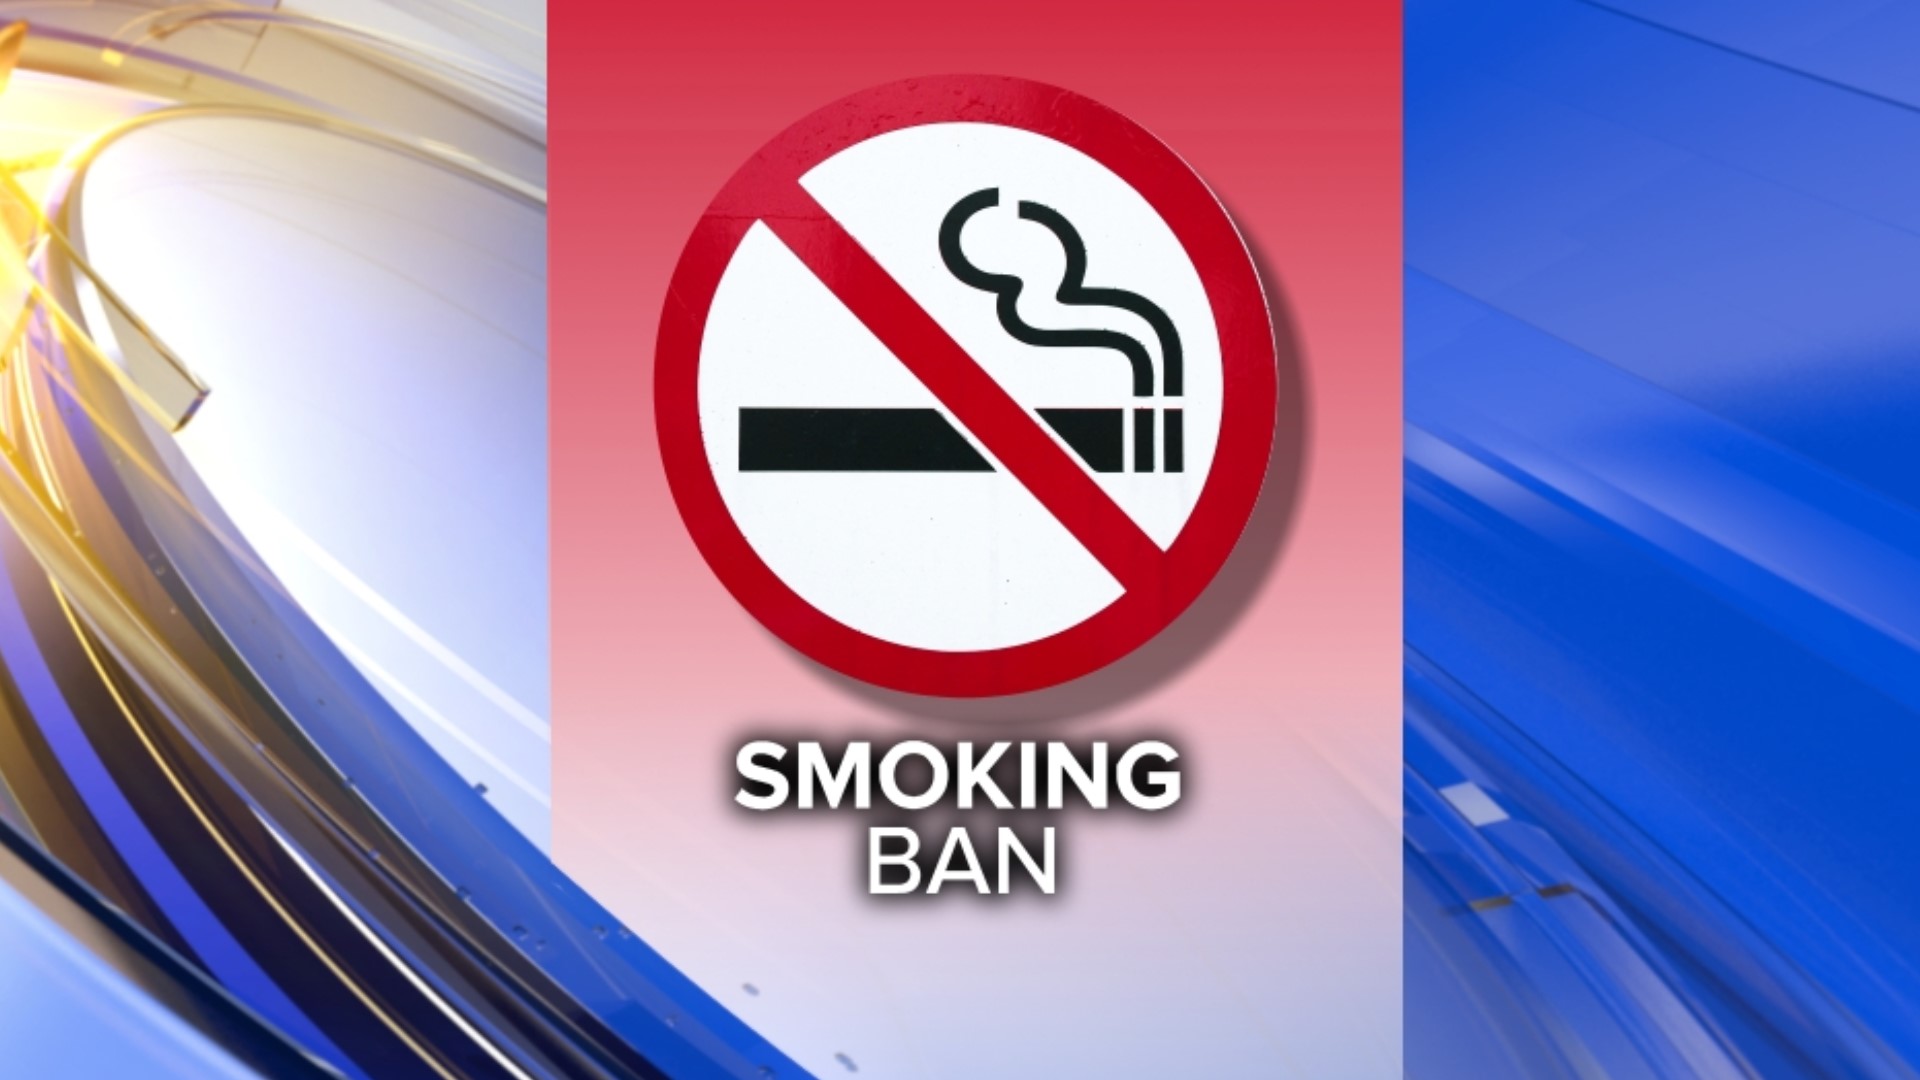 There's a proposal in Harrisburg to ban smoking inside all businesses, even those that currently allow it.